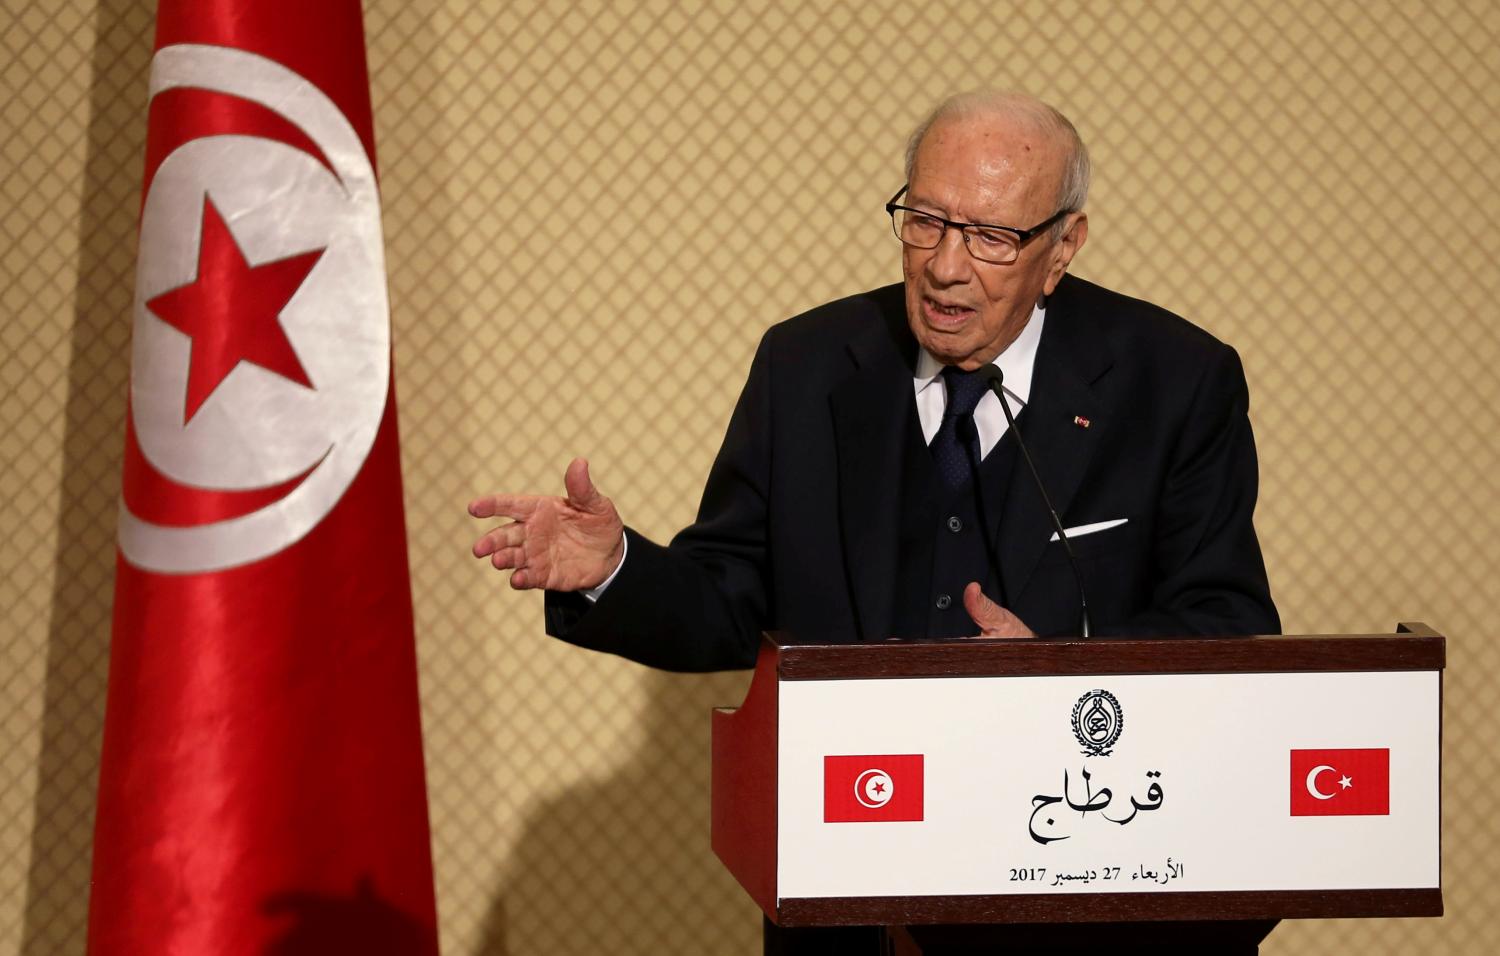 Tunisia's President Beji Caid Essebsi speaks during a news conference at Carthage Palace in Tunis, Tunisia, December 27, 2017. REUTERS/Zoubeir Souissi - RC1C743F3D50